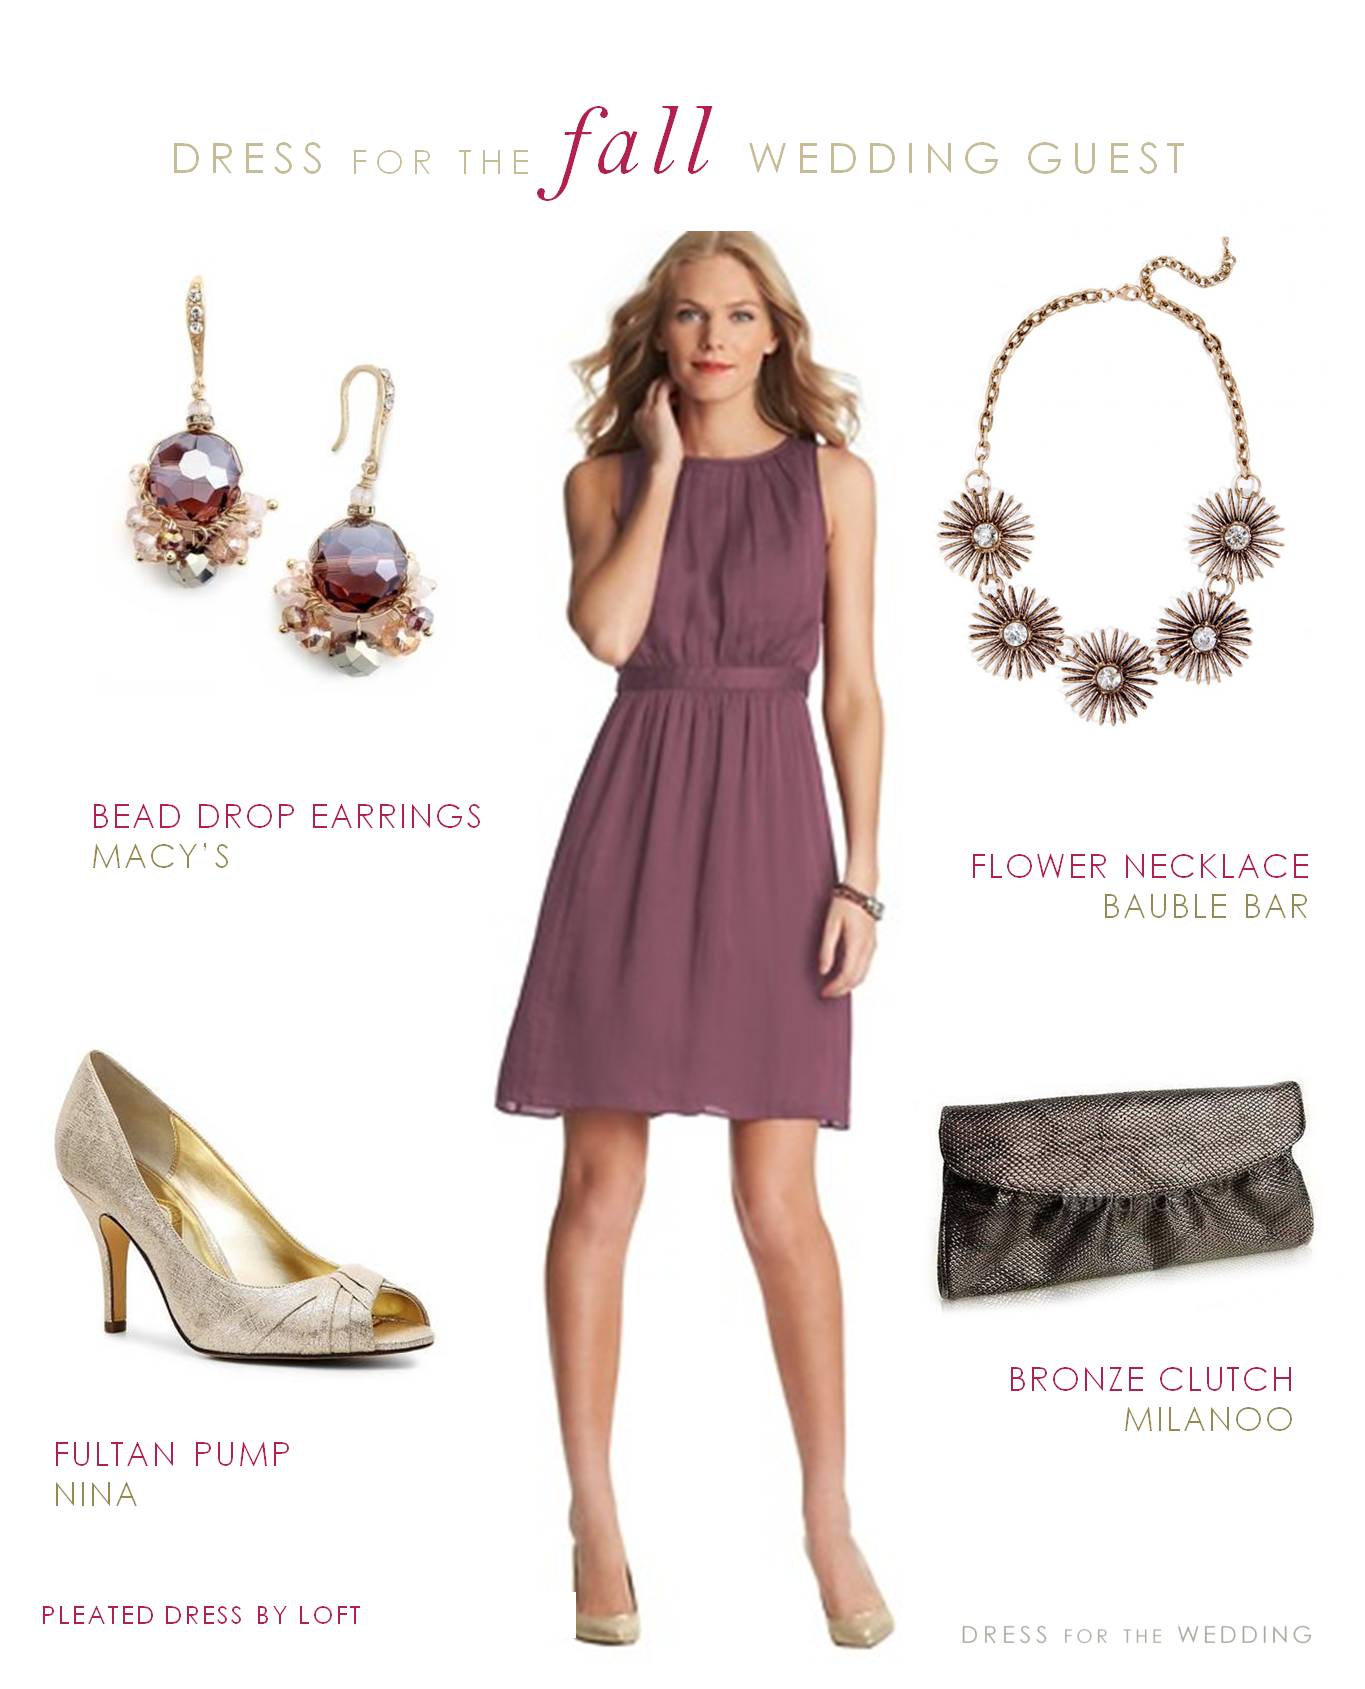 Dressy Casual Dress for a September Wedding Guest